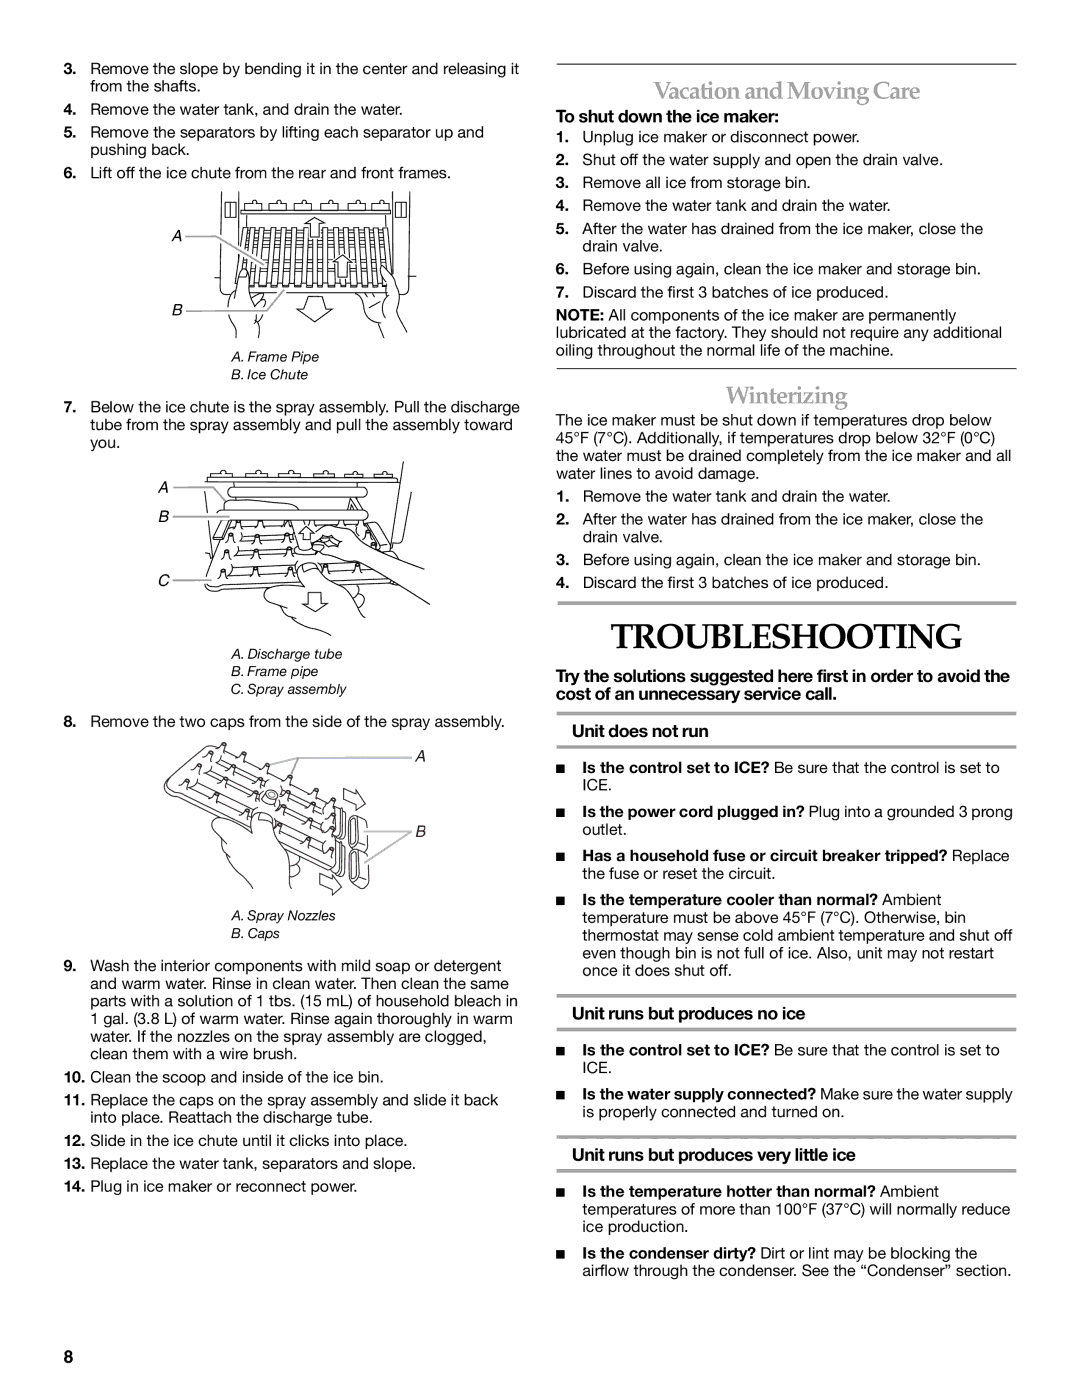 KitchenAid OUTDOOR ICE MAKER manual Troubleshooting, Vacation and Moving Care, Winterizing 